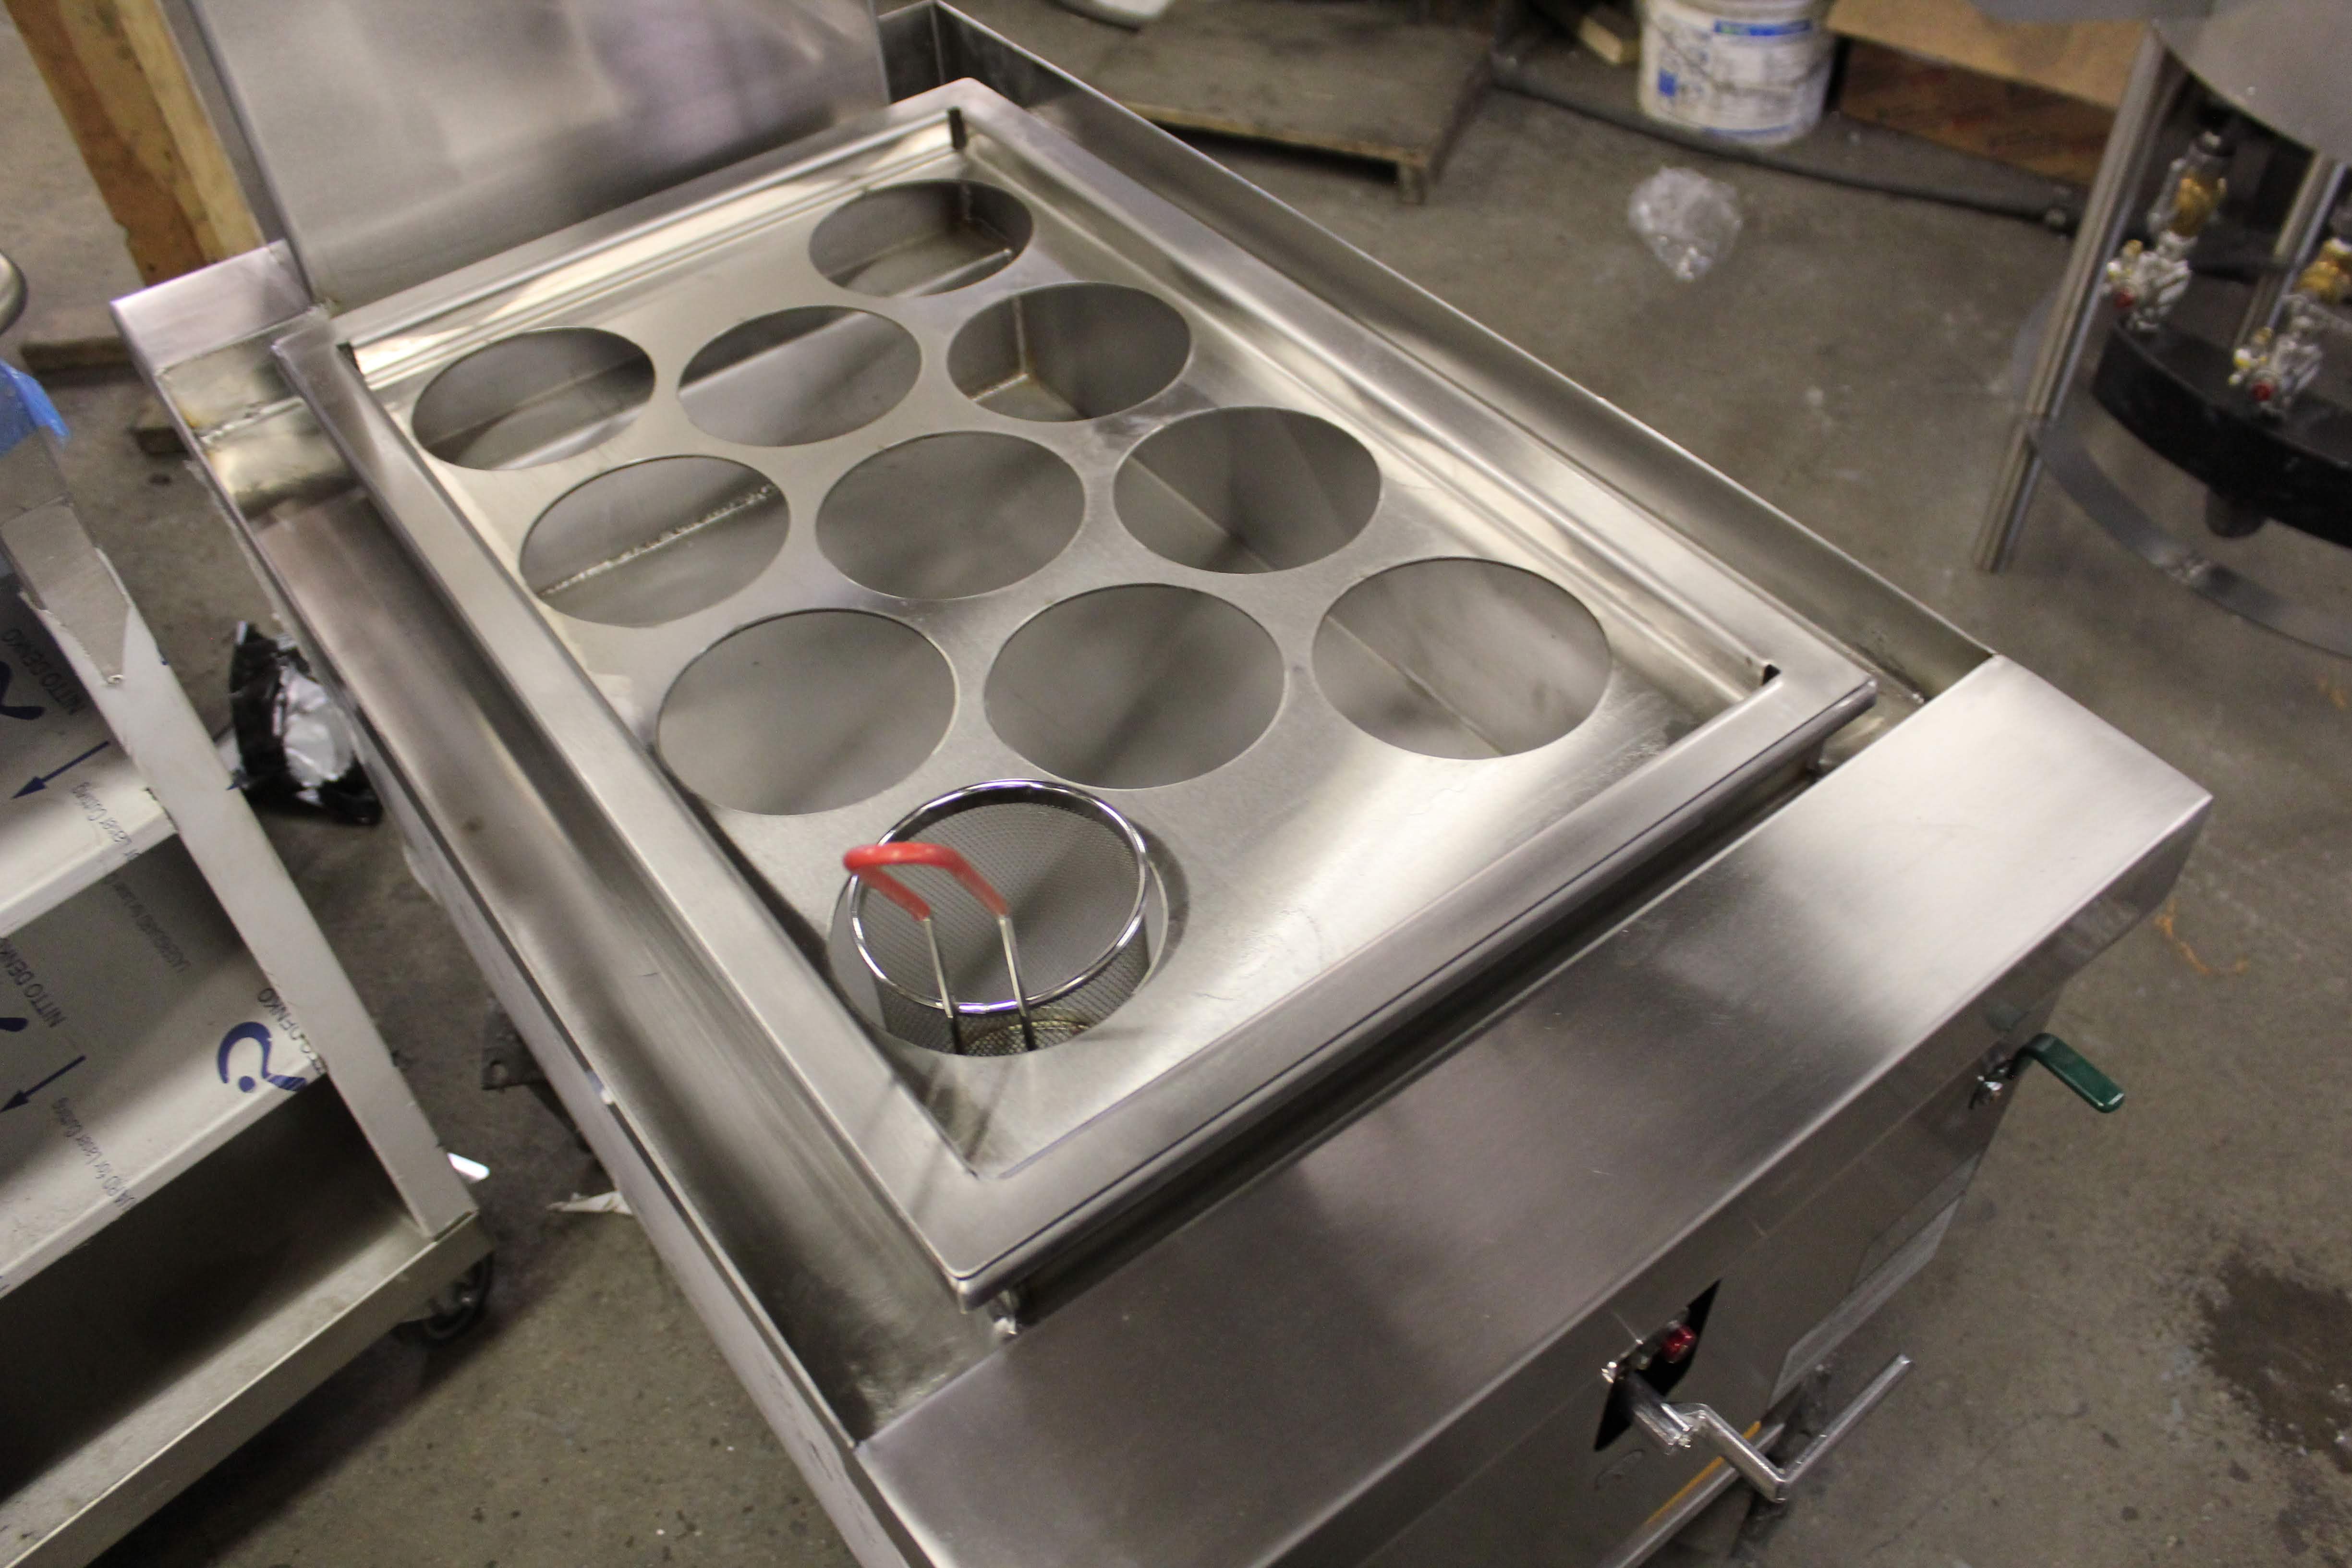 Stainless Steel Dim Sum Steamer - Town Food Service Equipment Co., Inc.